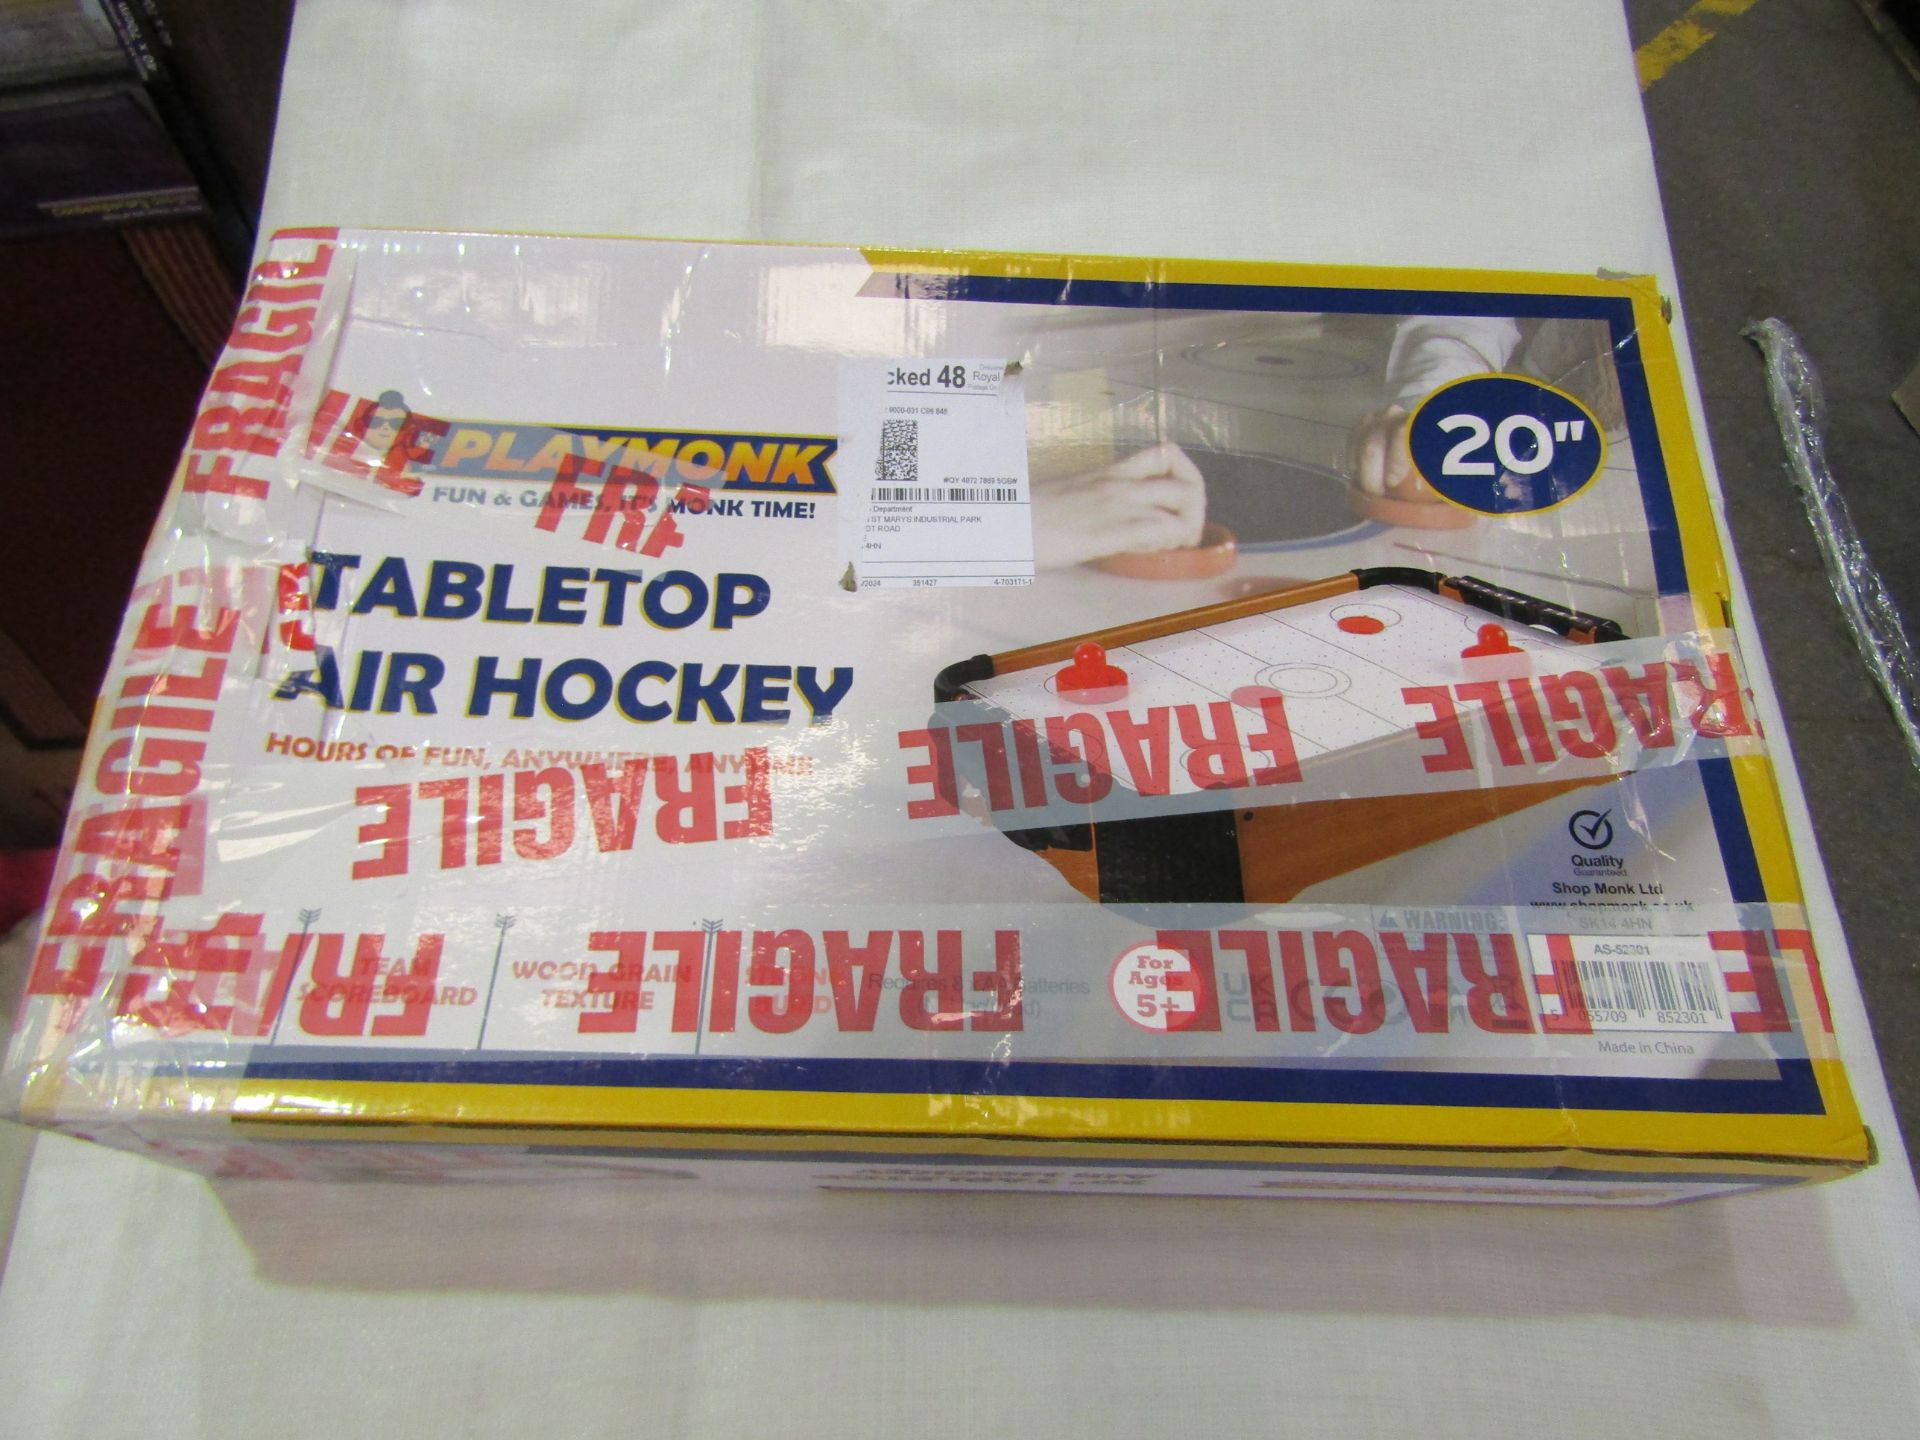 Playmonk 20" Table Top Air Hockey - Unchecked & Boxed.